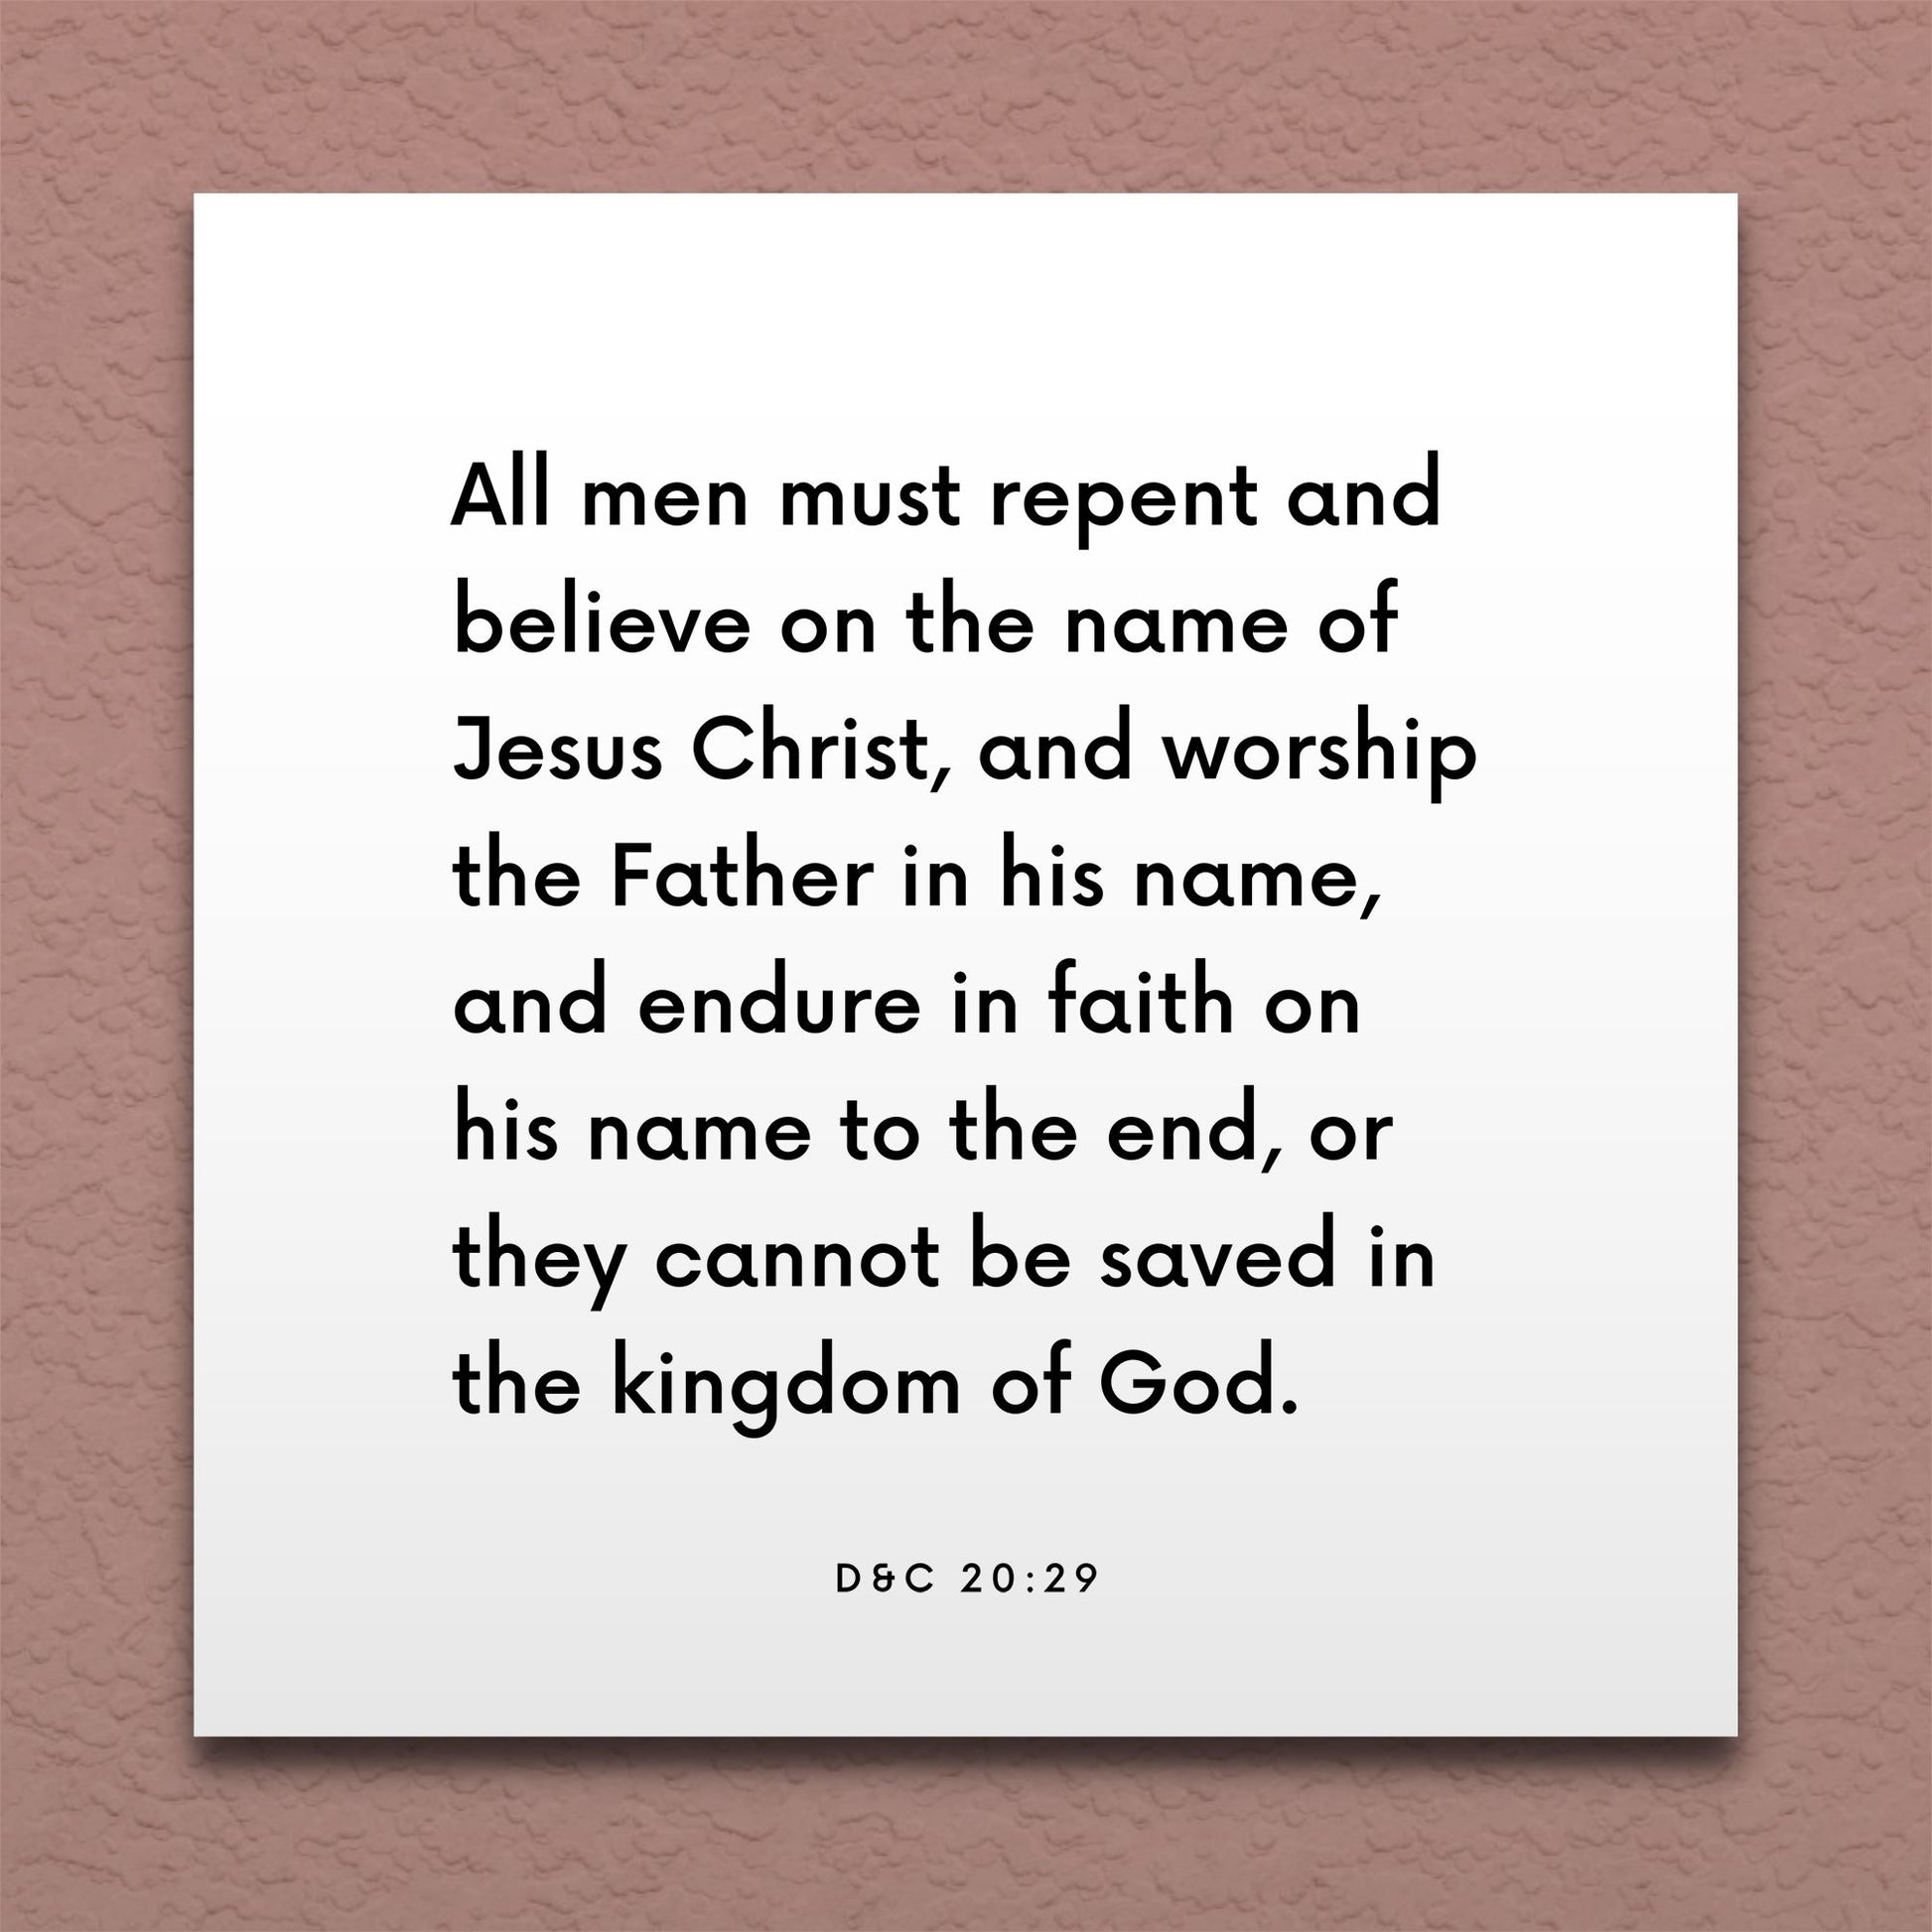 Wall-mounted scripture tile for D&C 20:29 - "All men must repent and believe on the name of Jesus Christ"